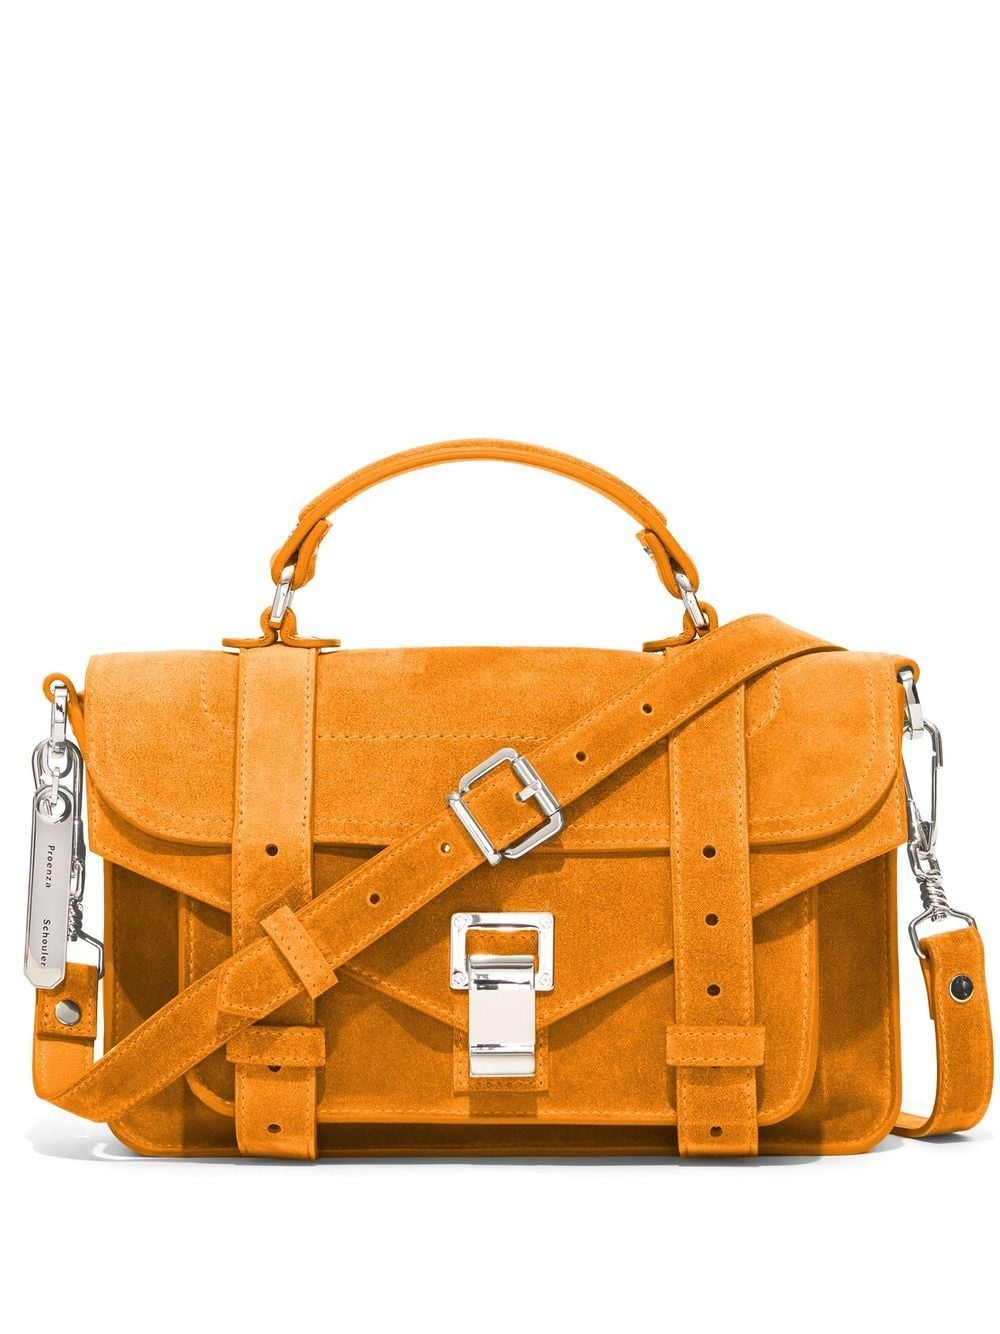 Sold at Auction: Proenza Schouler PS1 Tiny Suede Satchel